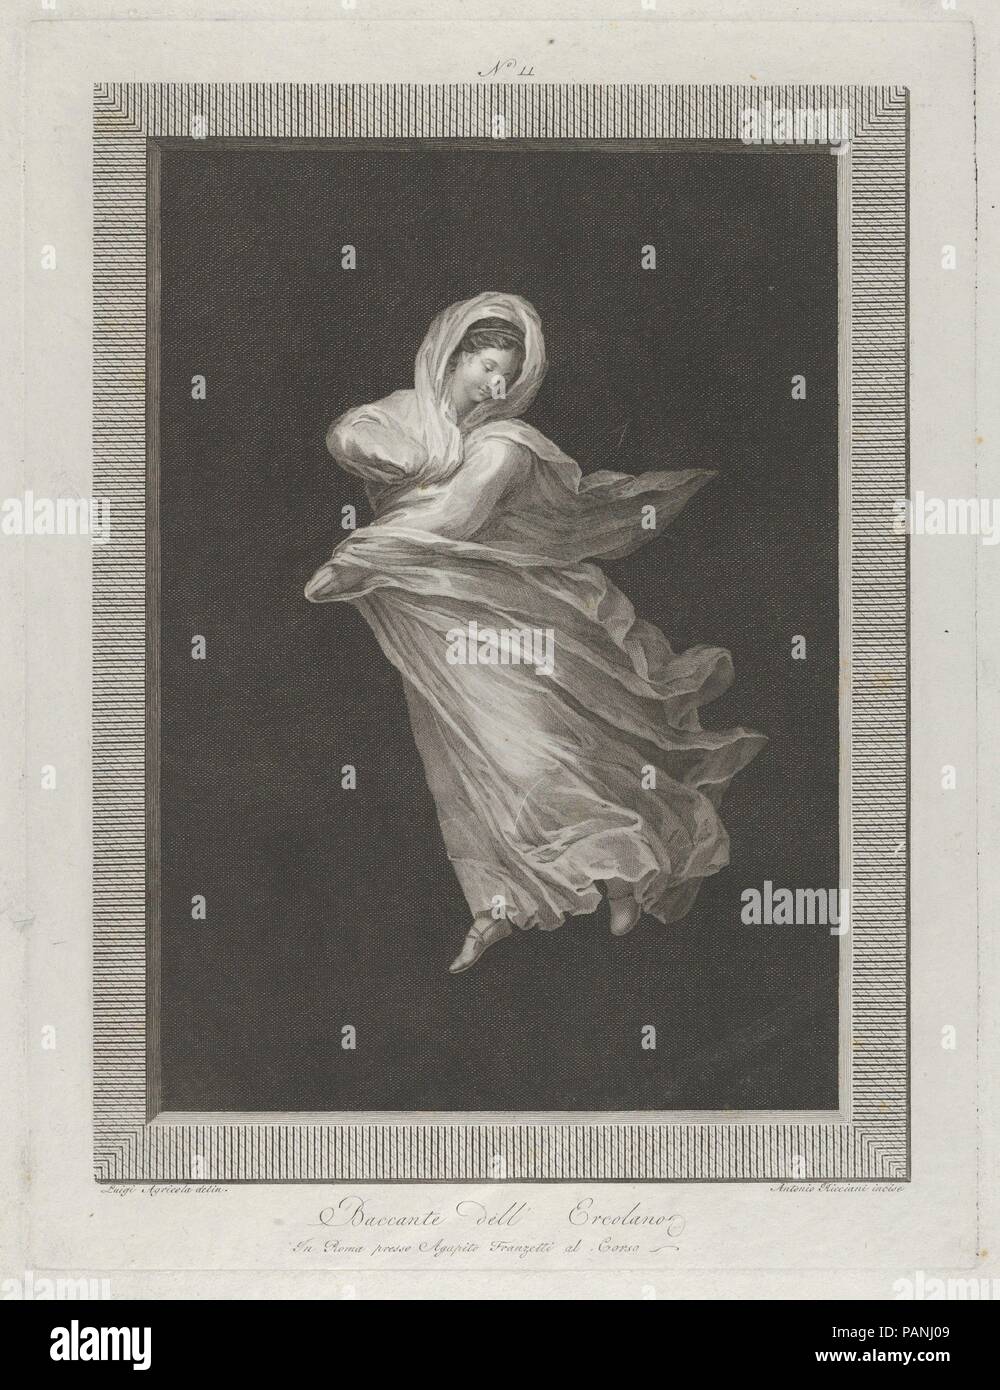 A bacchante wearing a flowing drapery, looking down, right arm bent and left arm outstretched, set against a black background inside a rectangular frame. Artist: Engraved by Antonio Ricciani (Italian, Rome 1775/76-1847 Naples); Intermediary draughtsman Luigi Agricola (Italian, born ca. 1750). Dimensions: Sheet: 16 5/16 × 12 3/8 in. (41.4 × 31.5 cm)  Plate: 13 × 9 13/16 in. (33 × 25 cm). Publisher: Agapito Franzetti (Italian, active Rome, last quarter 18th century-first quarter 19th century). Date: ca. 1795-1847.  From a series of engravings depicting wall paintings from Herculaneum, made by va Stock Photo